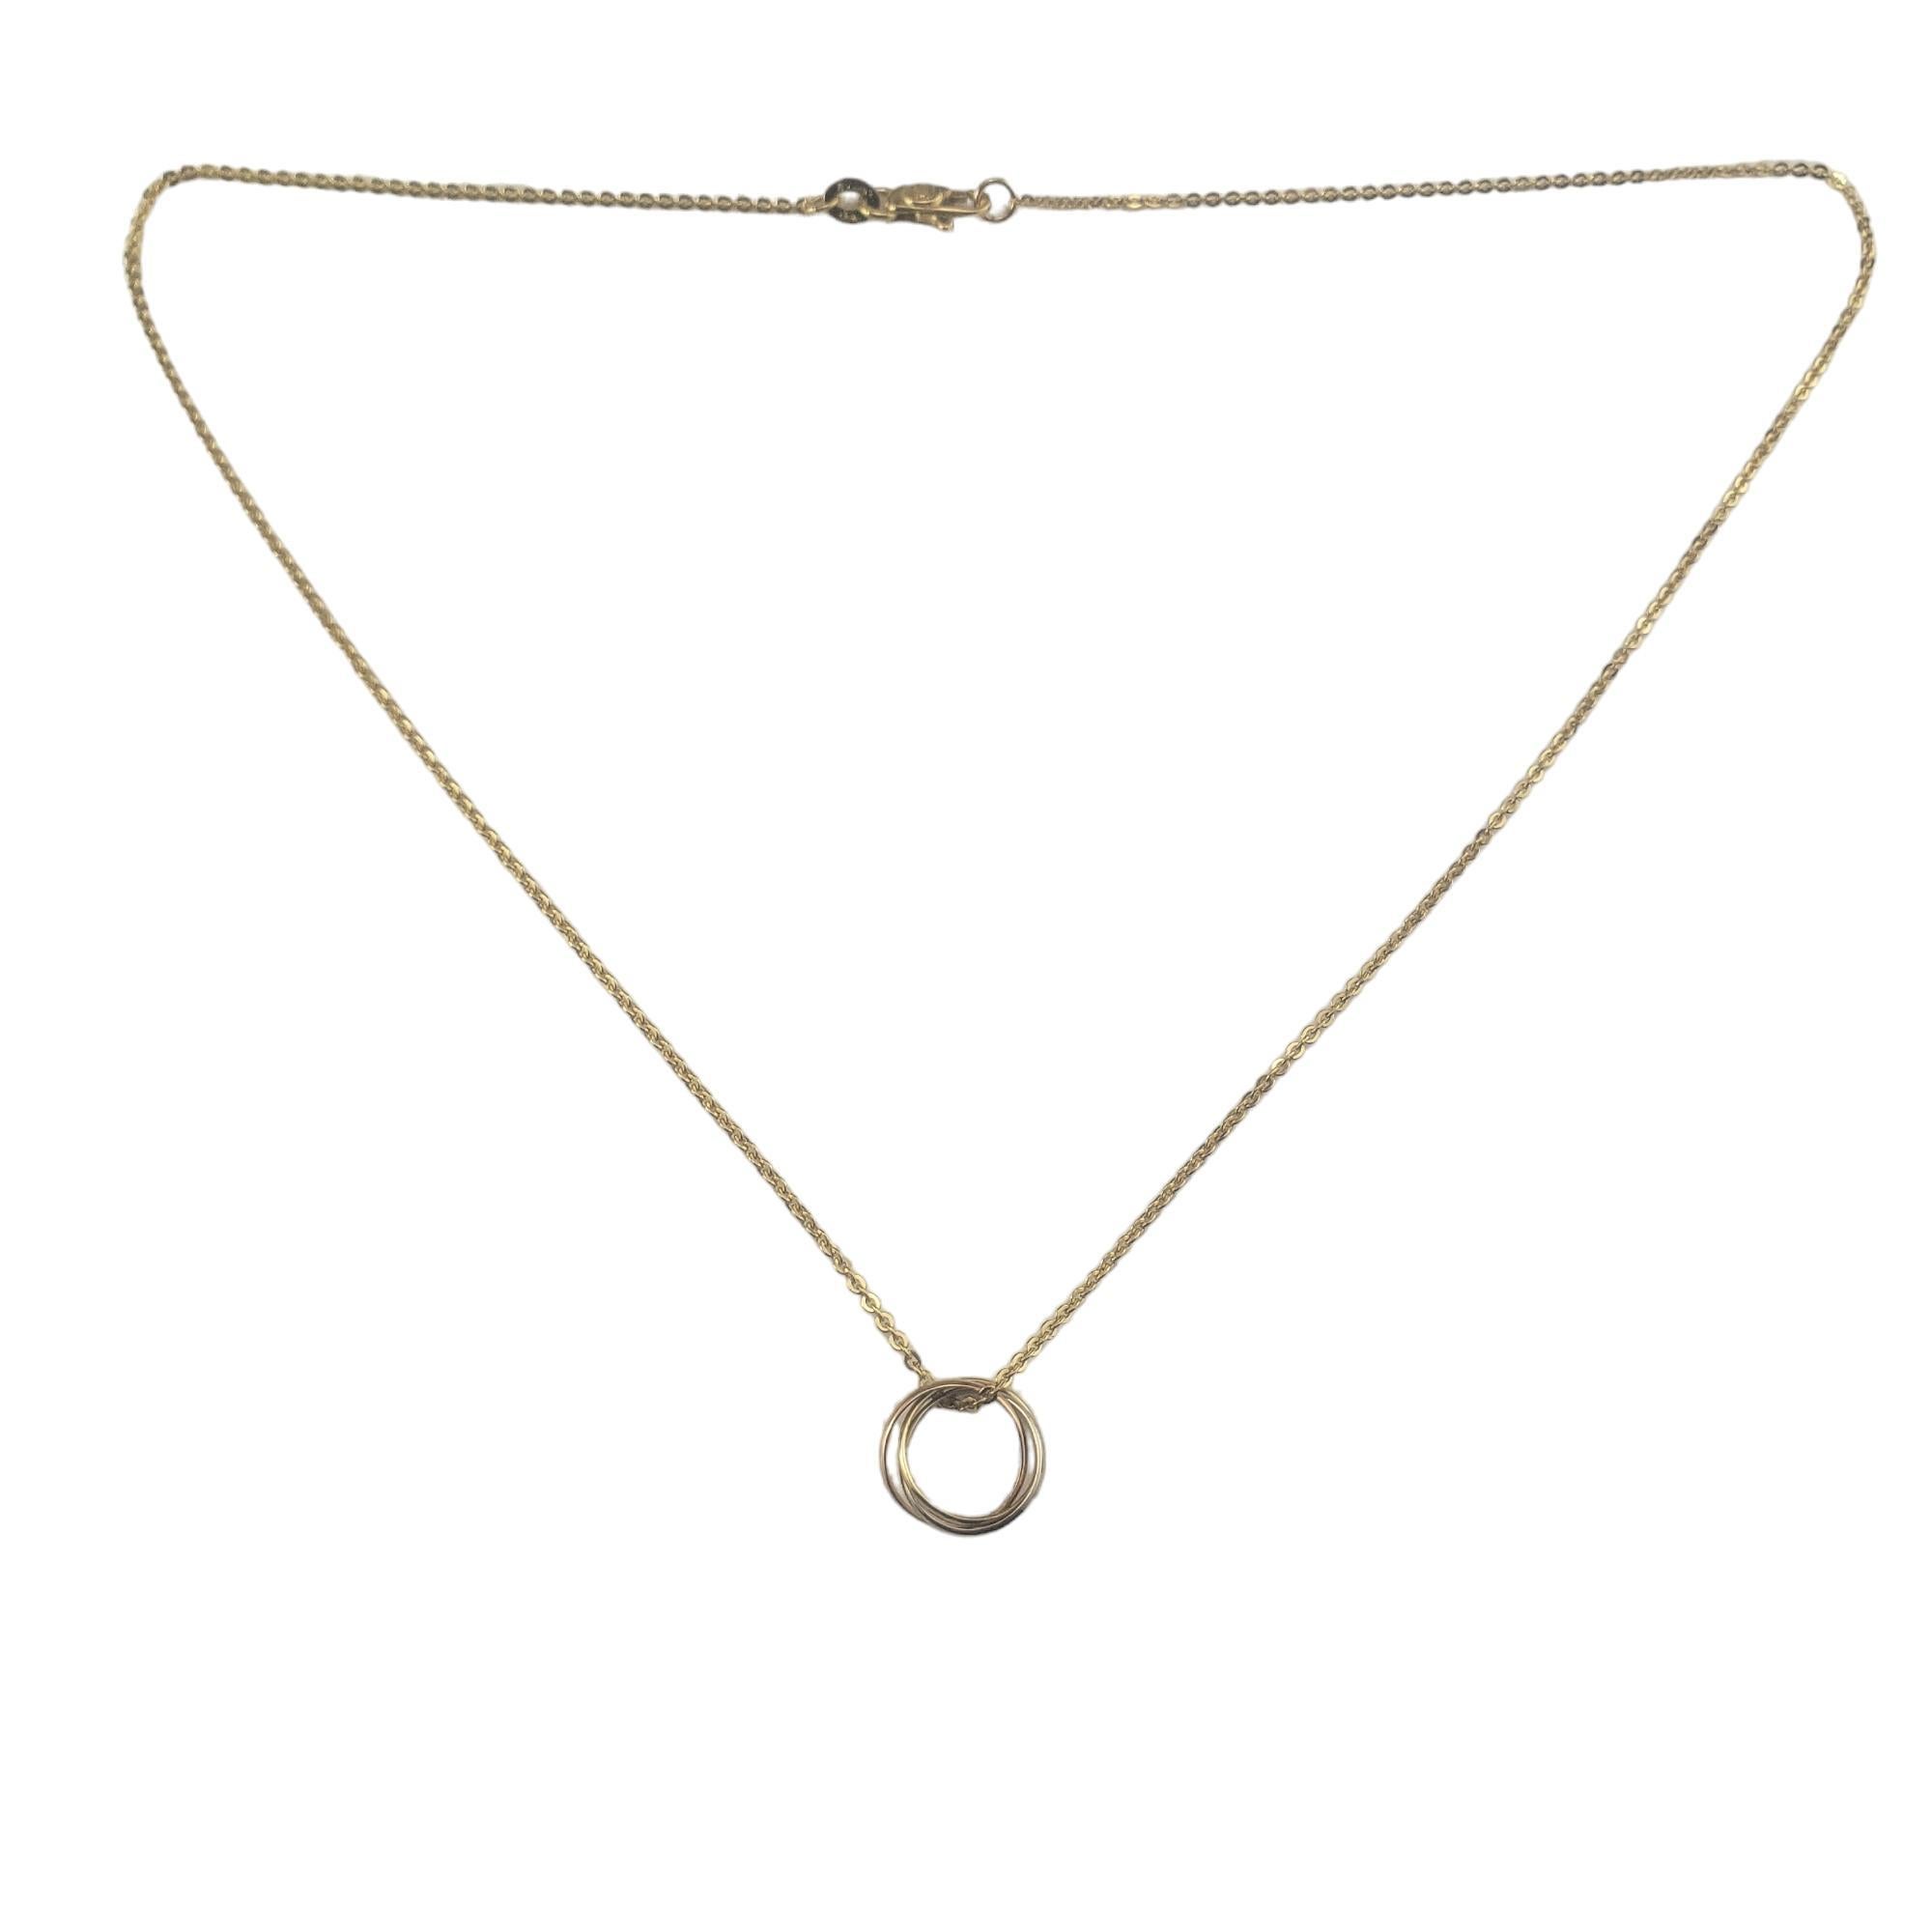 Cartier 18 Karat Yellow Rose and White Gold Trinity Necklace-

This stunning Trinity necklace is crafted in beautifully detailed 18K yellow, rose and white gold by Cartier.

Size: 16.5 inches (necklace)
          11 mm (pendant)

Hallmark:  Cartier